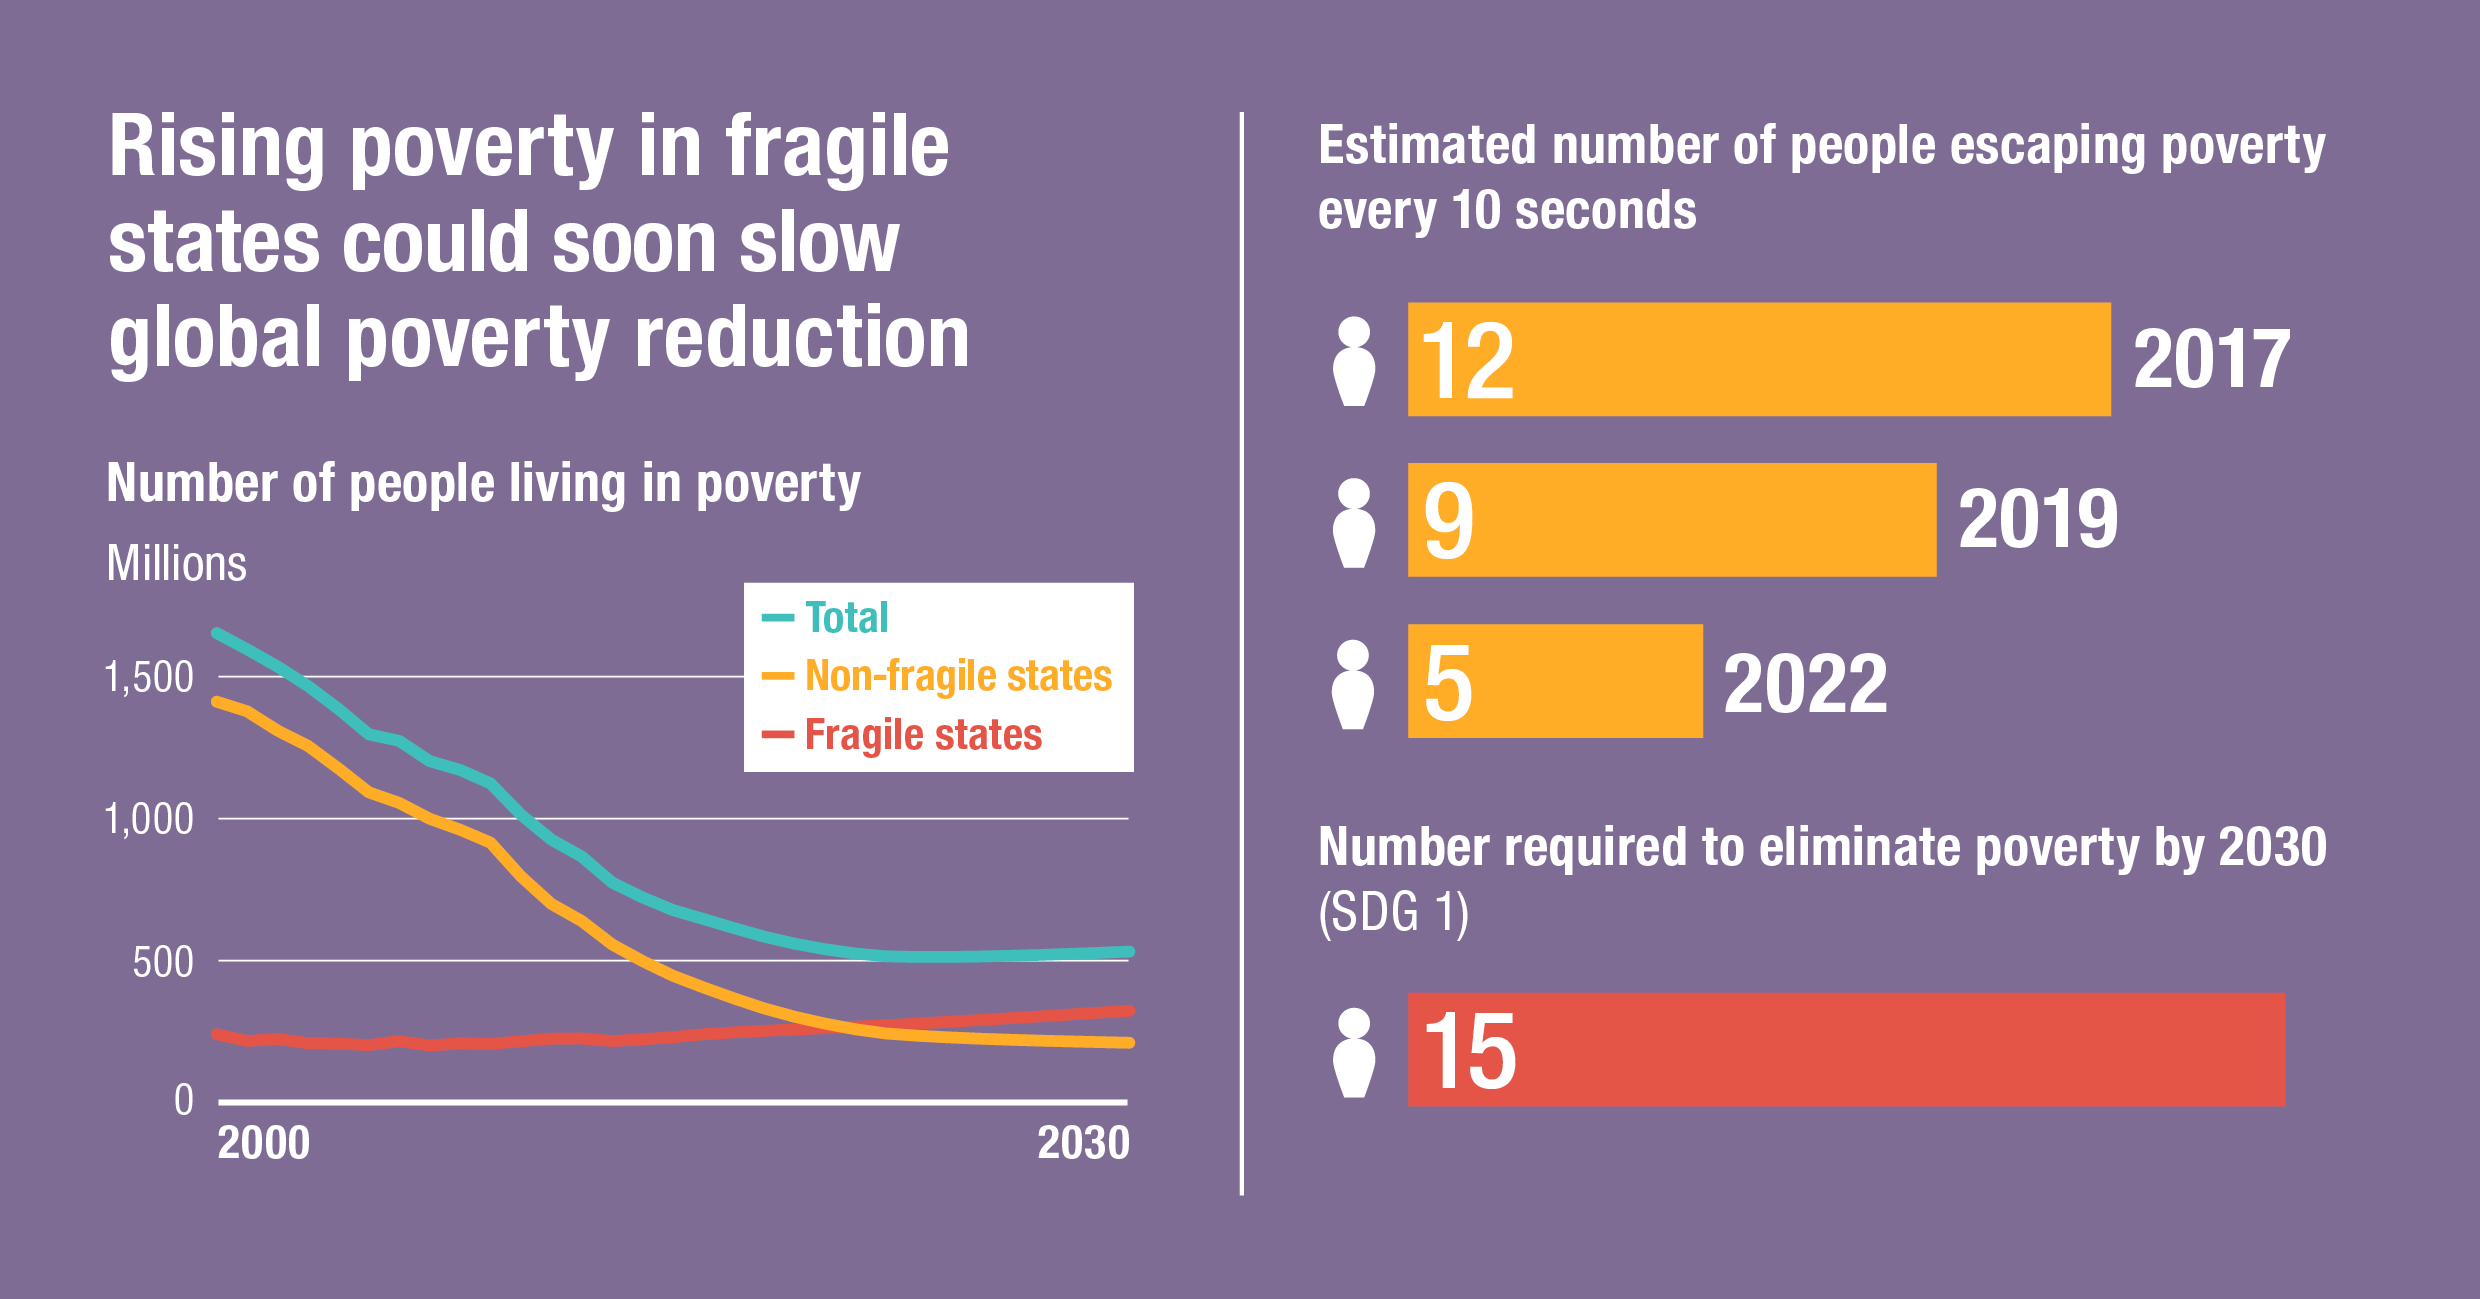 Rising poverty in fragile states could soon slow global poverty reduction